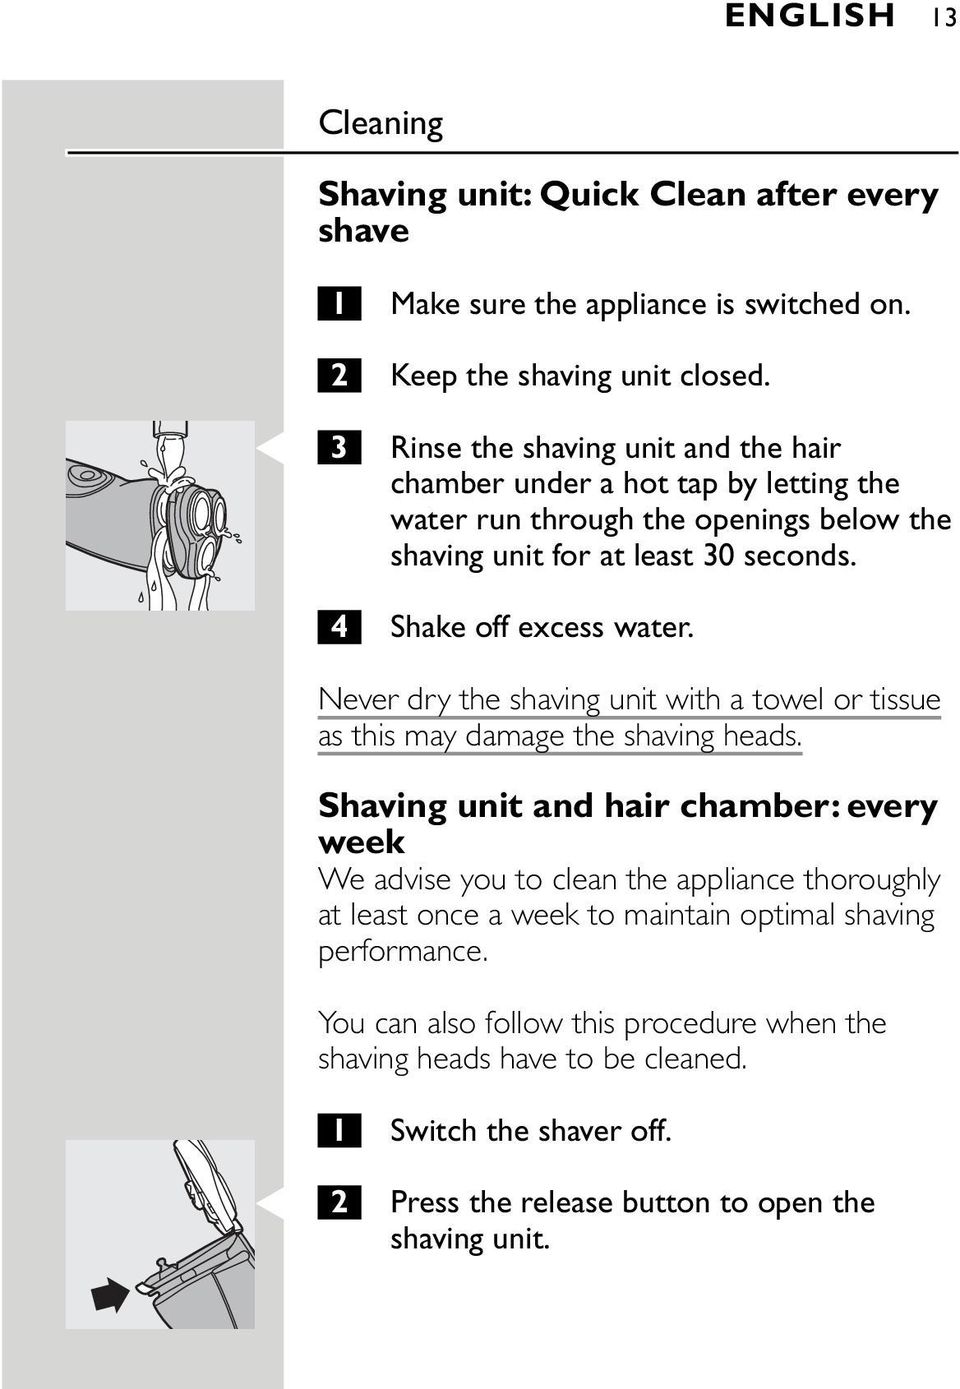 4 Shake off excess water. Never dry the shaving unit with a towel or tissue as this may damage the shaving heads.